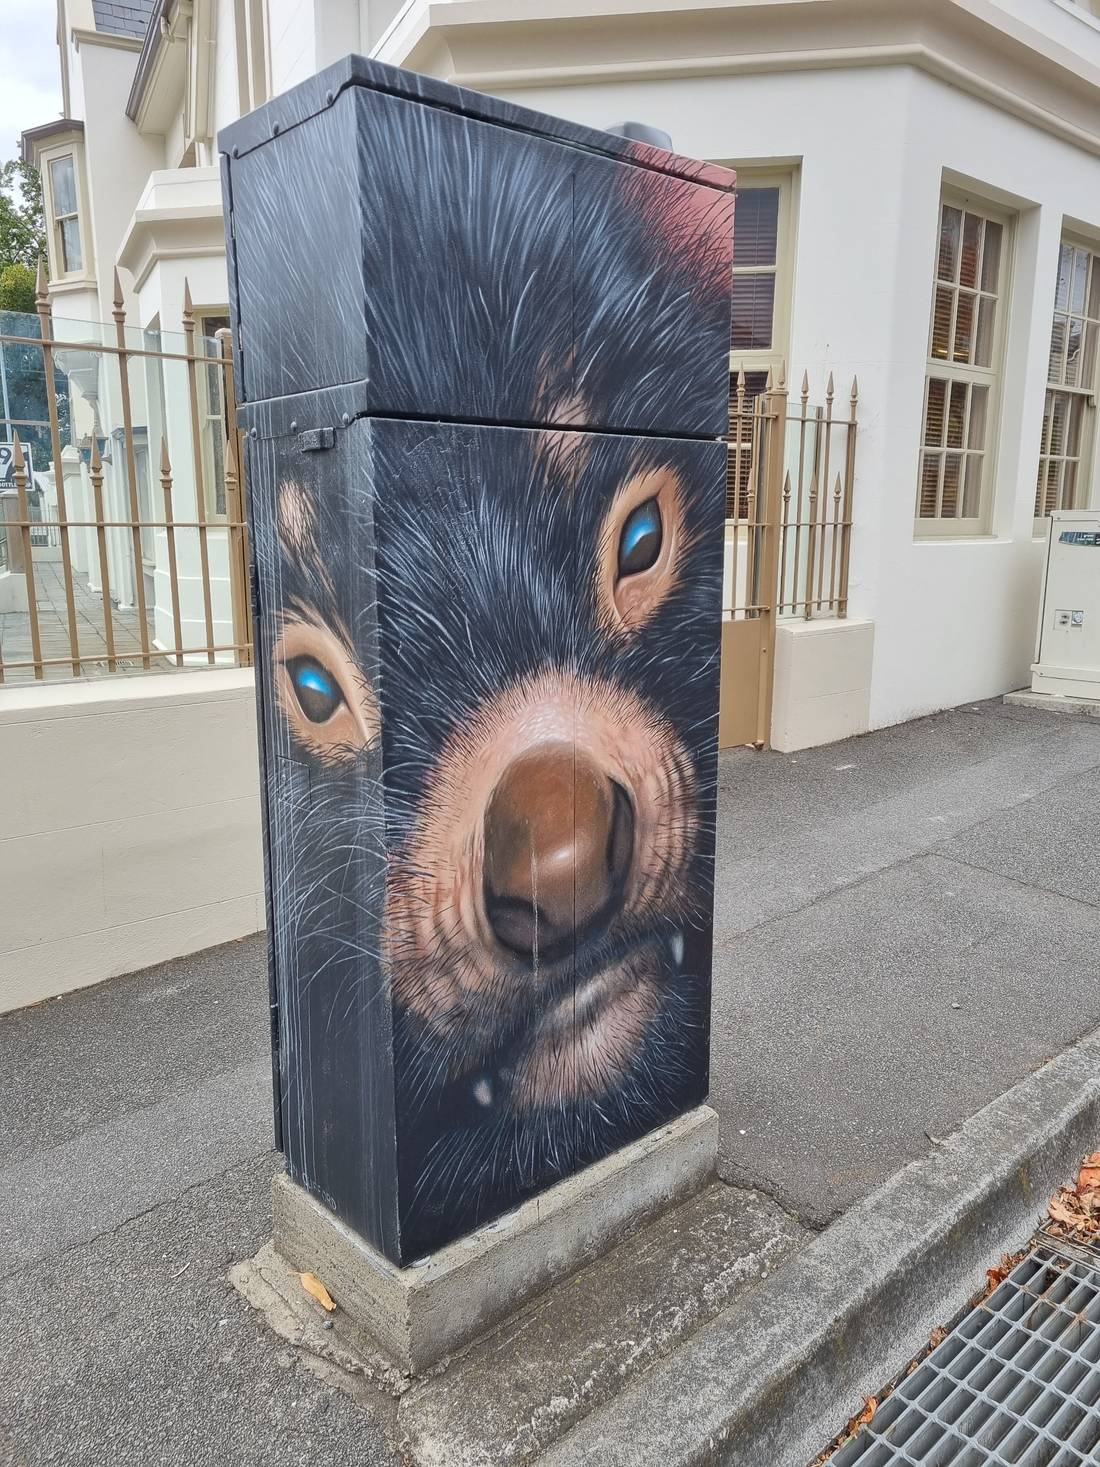 This is probably THE coolest traffic light control cabinet painting I’ve EVER seen! (This thing controls the traffic lights and in some towns/cities in Australia they paint them. But this one of the local and endangered Tasmanian Devil takes the cake!)